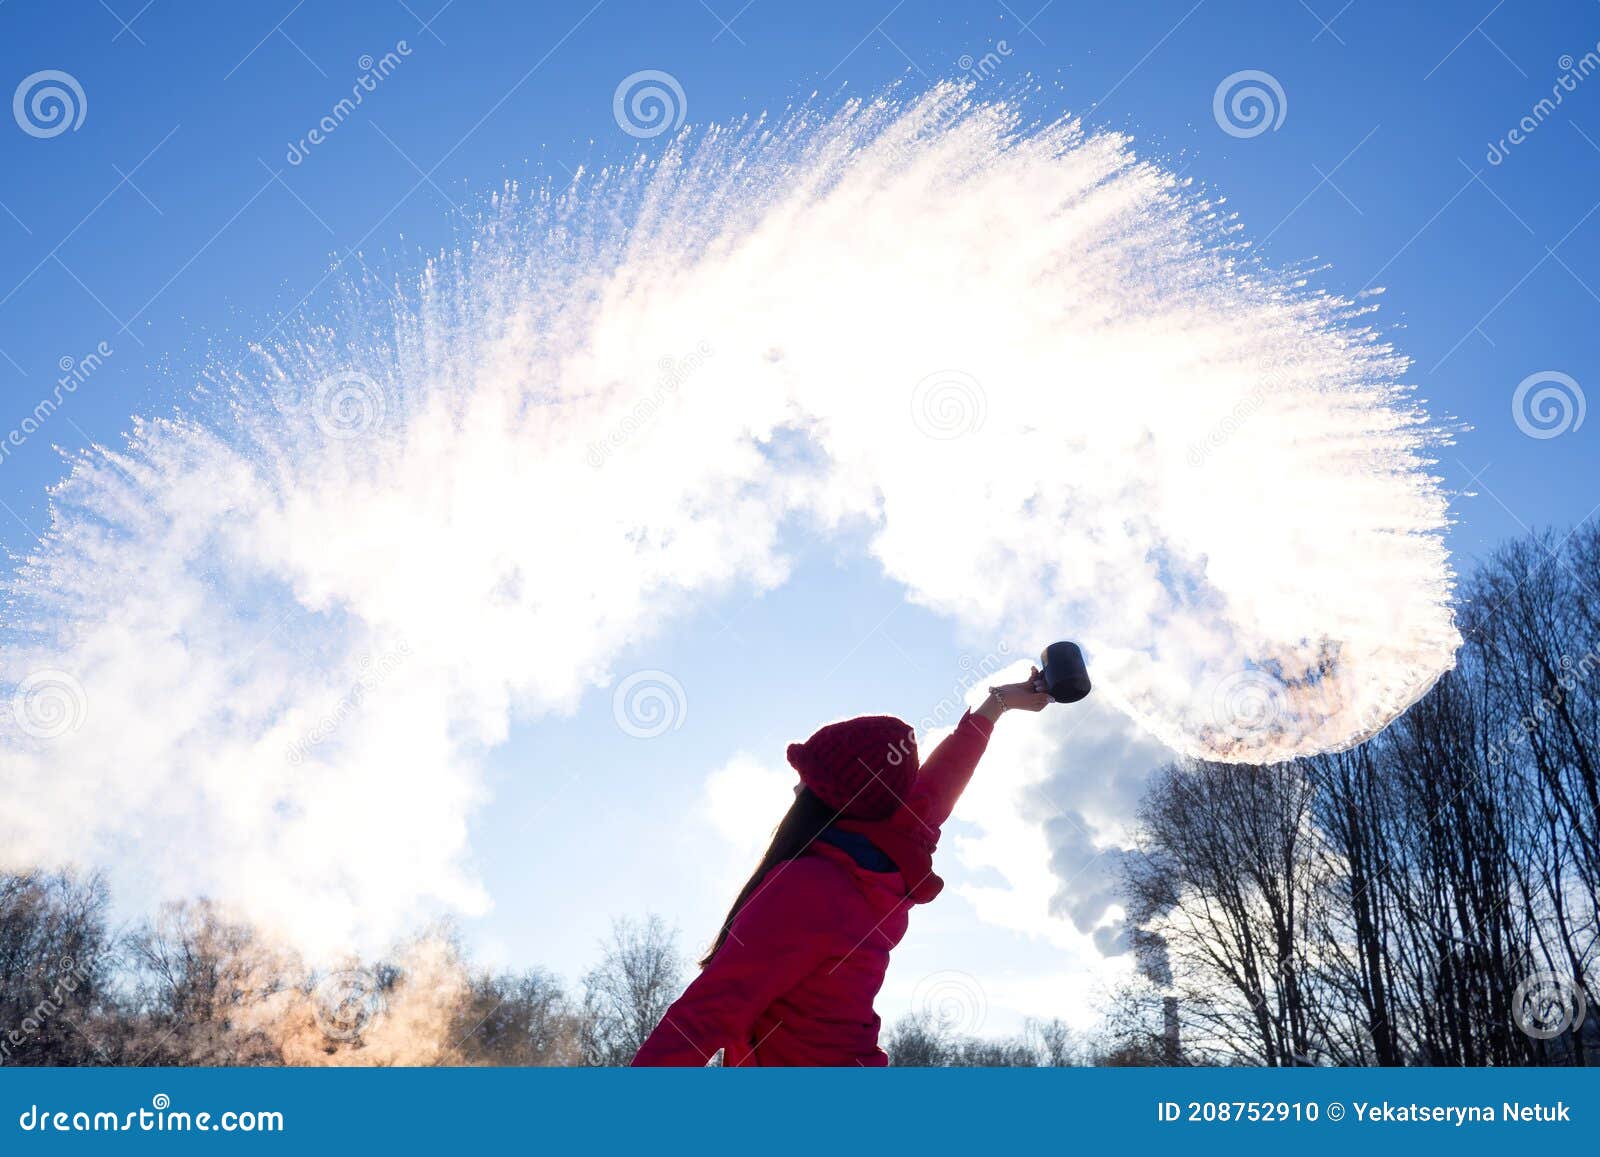 person pouring hot water up in the sky  sunny winter day. boiling water challenge  which instantly freezes  turns into snow if the